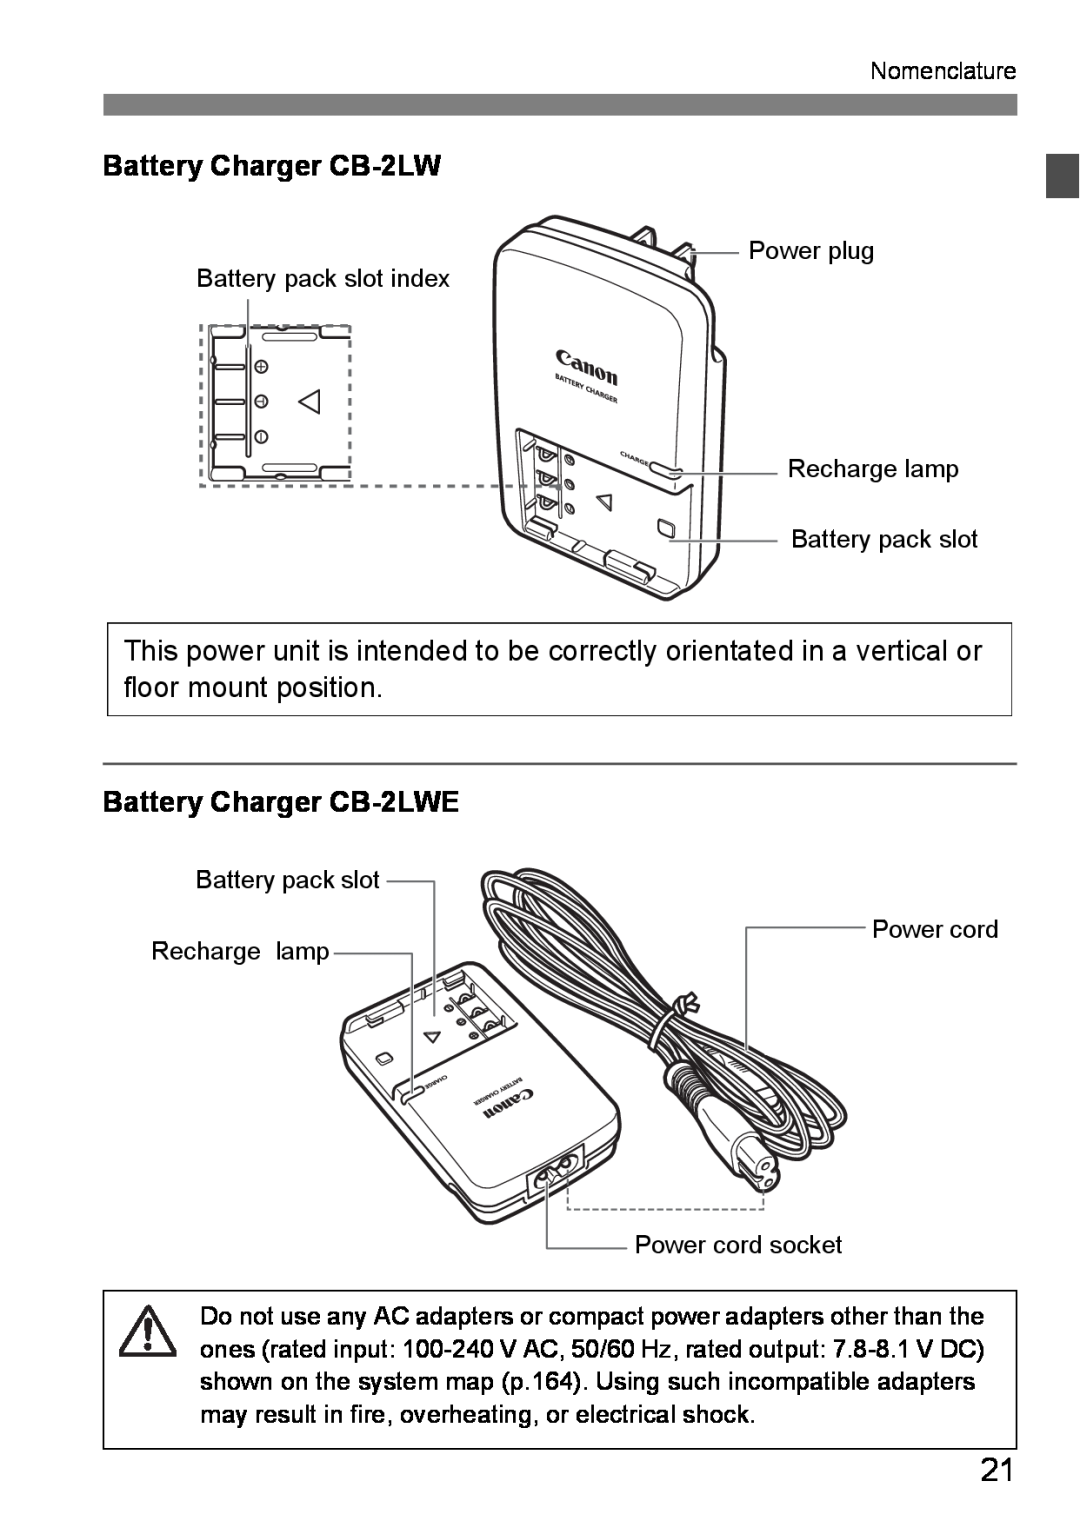 Canon EOS DIGITAL REBEL XTI instruction manual Battery Charger CB-2LWE 